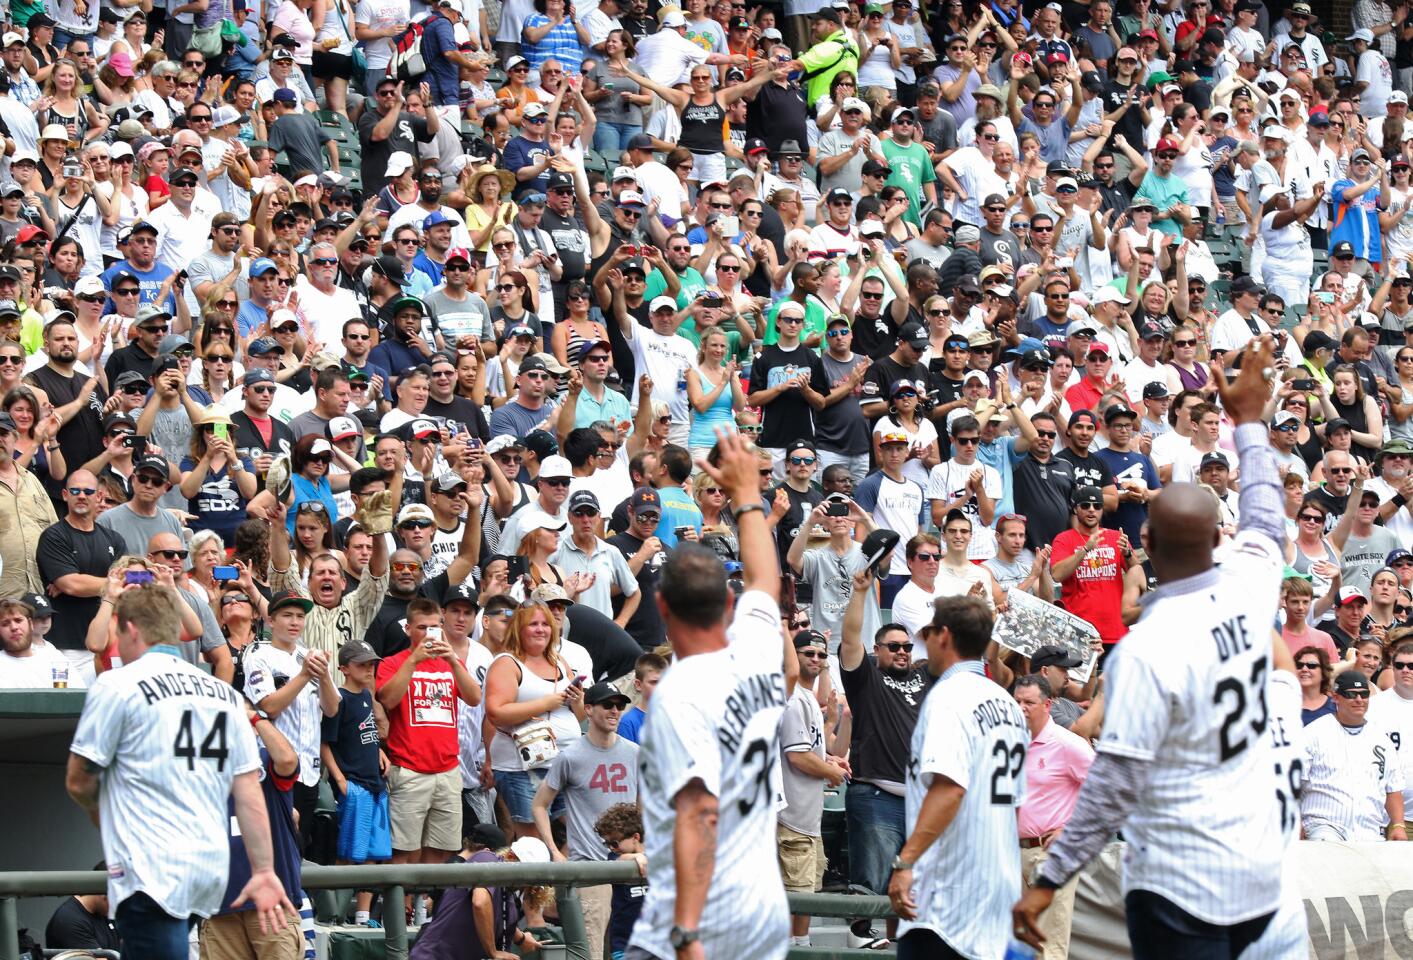 Former Chicago White Sox players wave to fans during a 2005 World Series Championship 10th anniversary ceremony on Saturday, July 18.